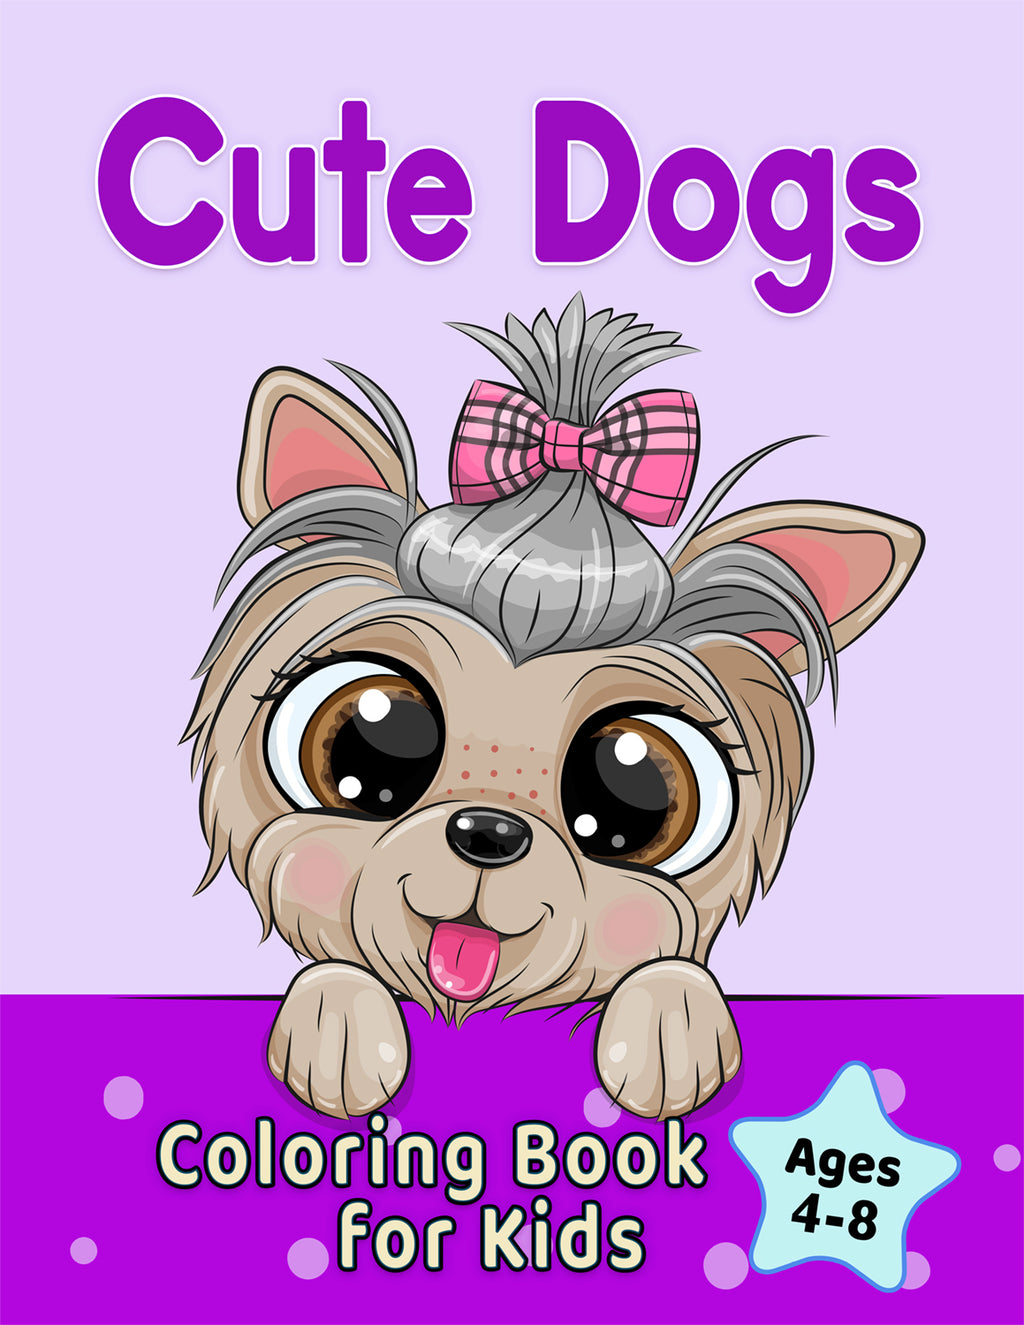 cute dogs coloring book for kids ages 4-8